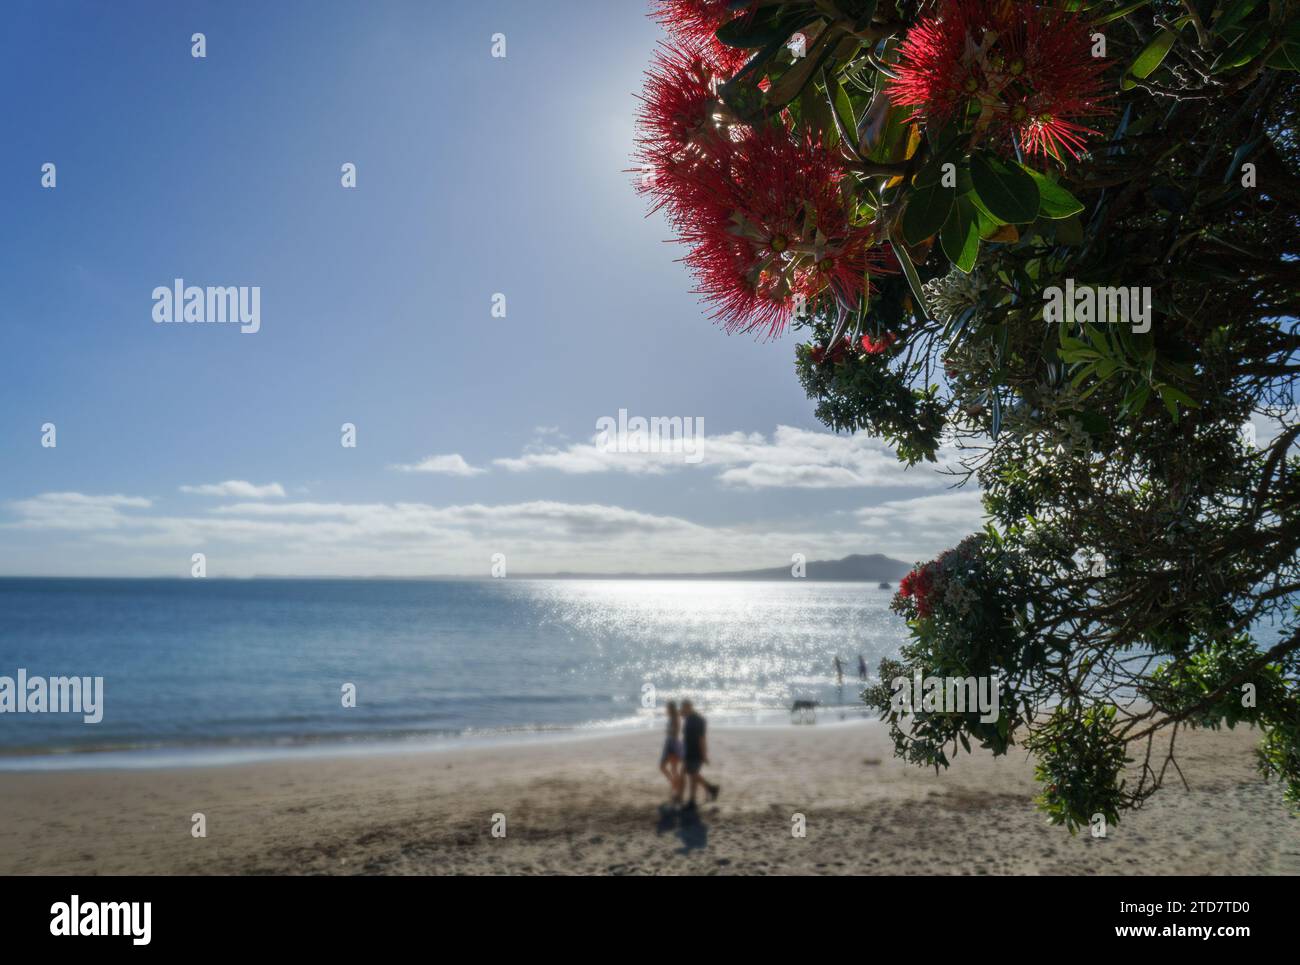 Pohutukawa trees in full bloom in summer, New Zealand Christmas Tree. Unrecognizable people and dog walking on the beach. Stock Photo